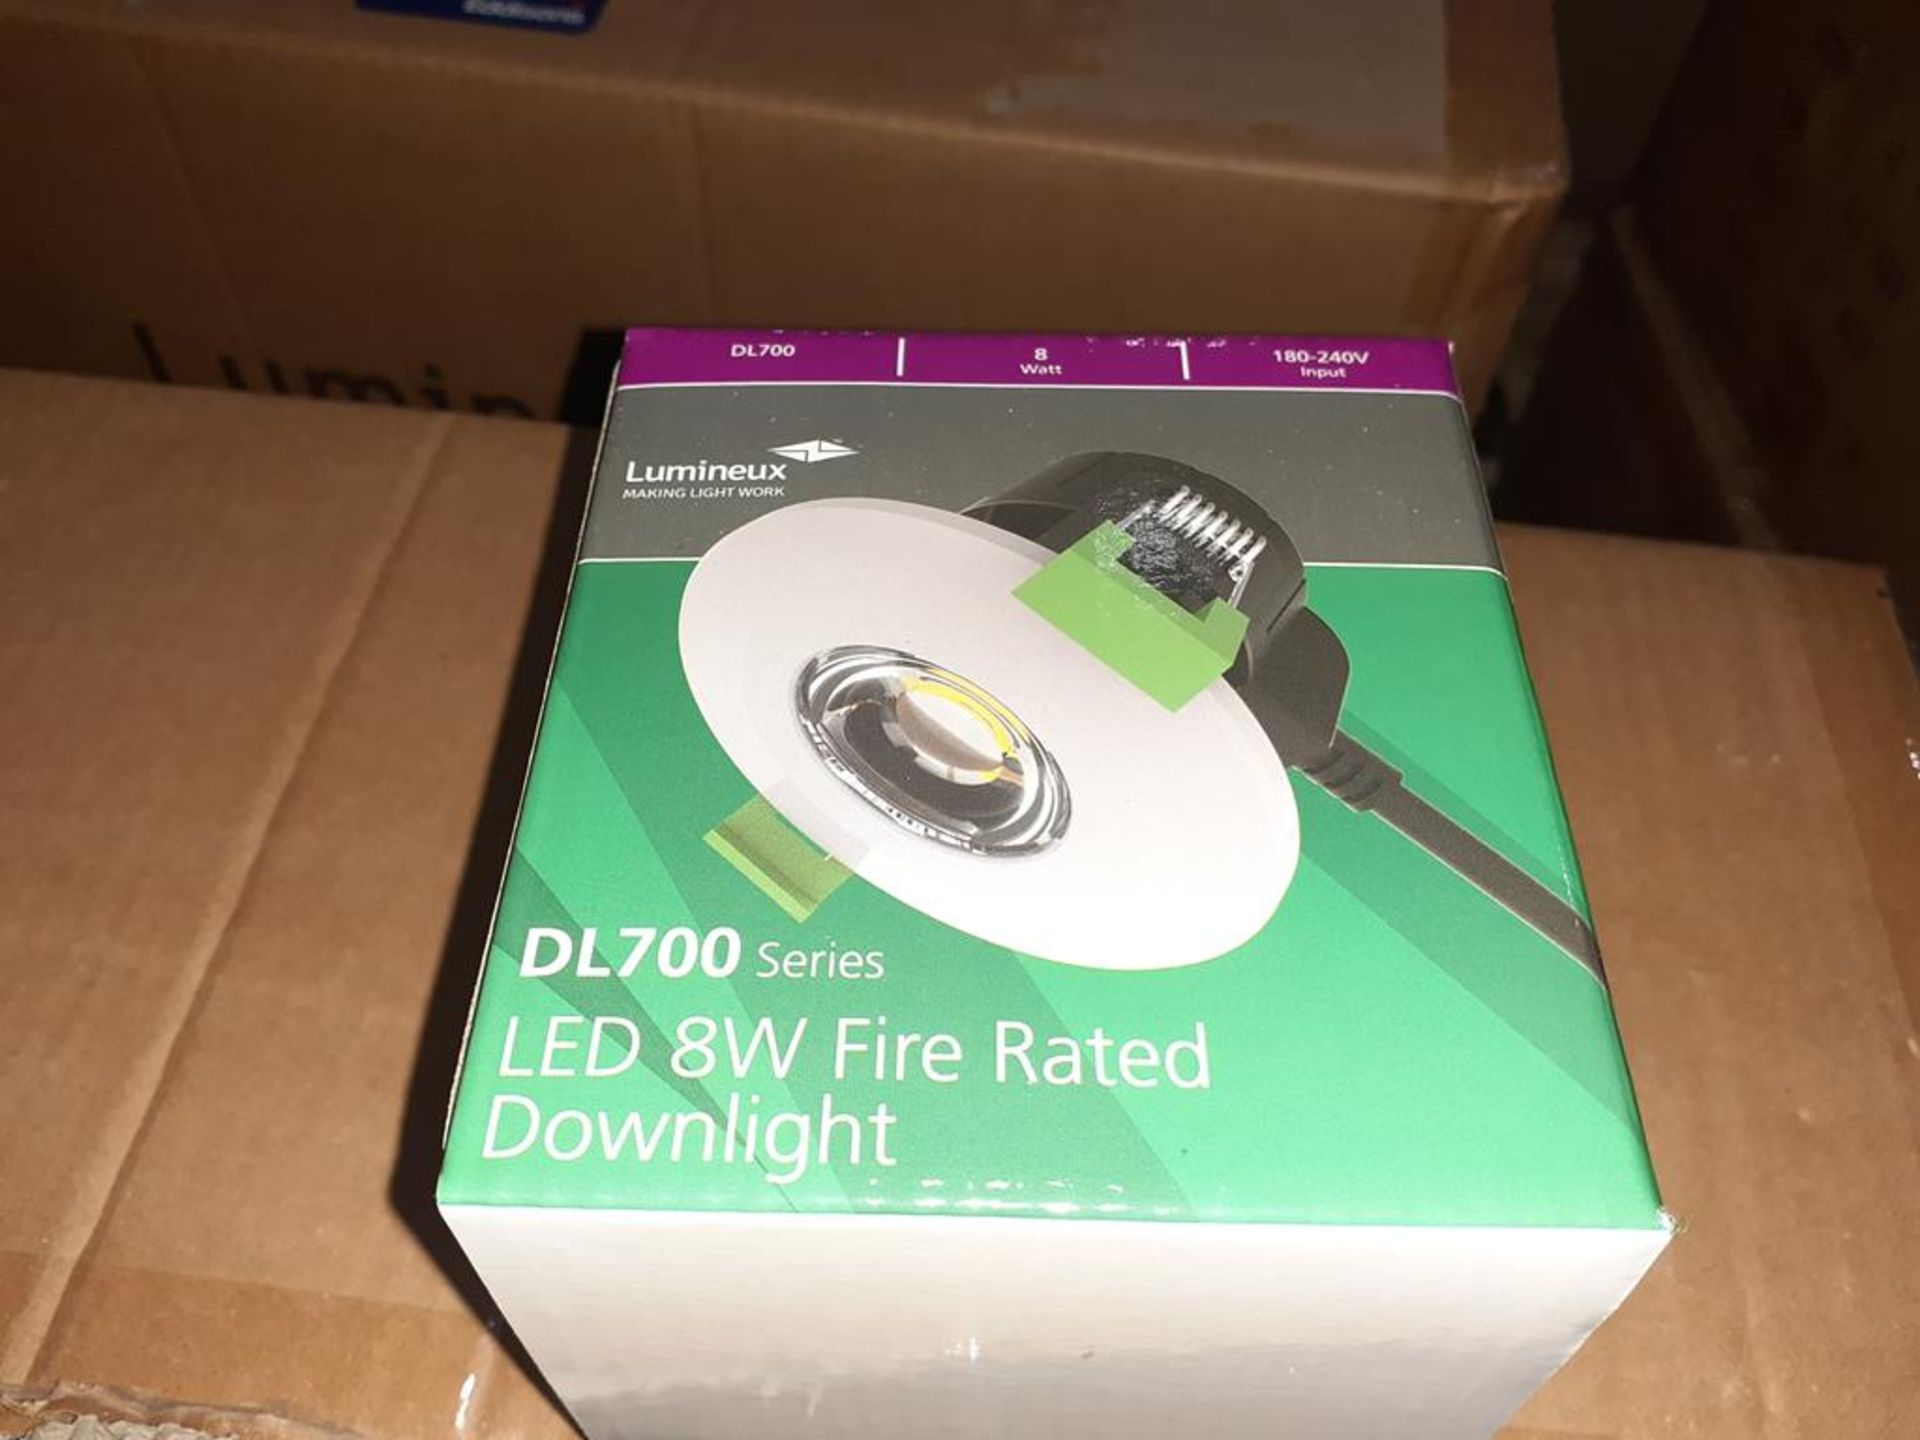 80 x LED 8W Fire Rated Downlight 4000K 180-240V Input OEM Trade Price £ 985 - Image 2 of 3